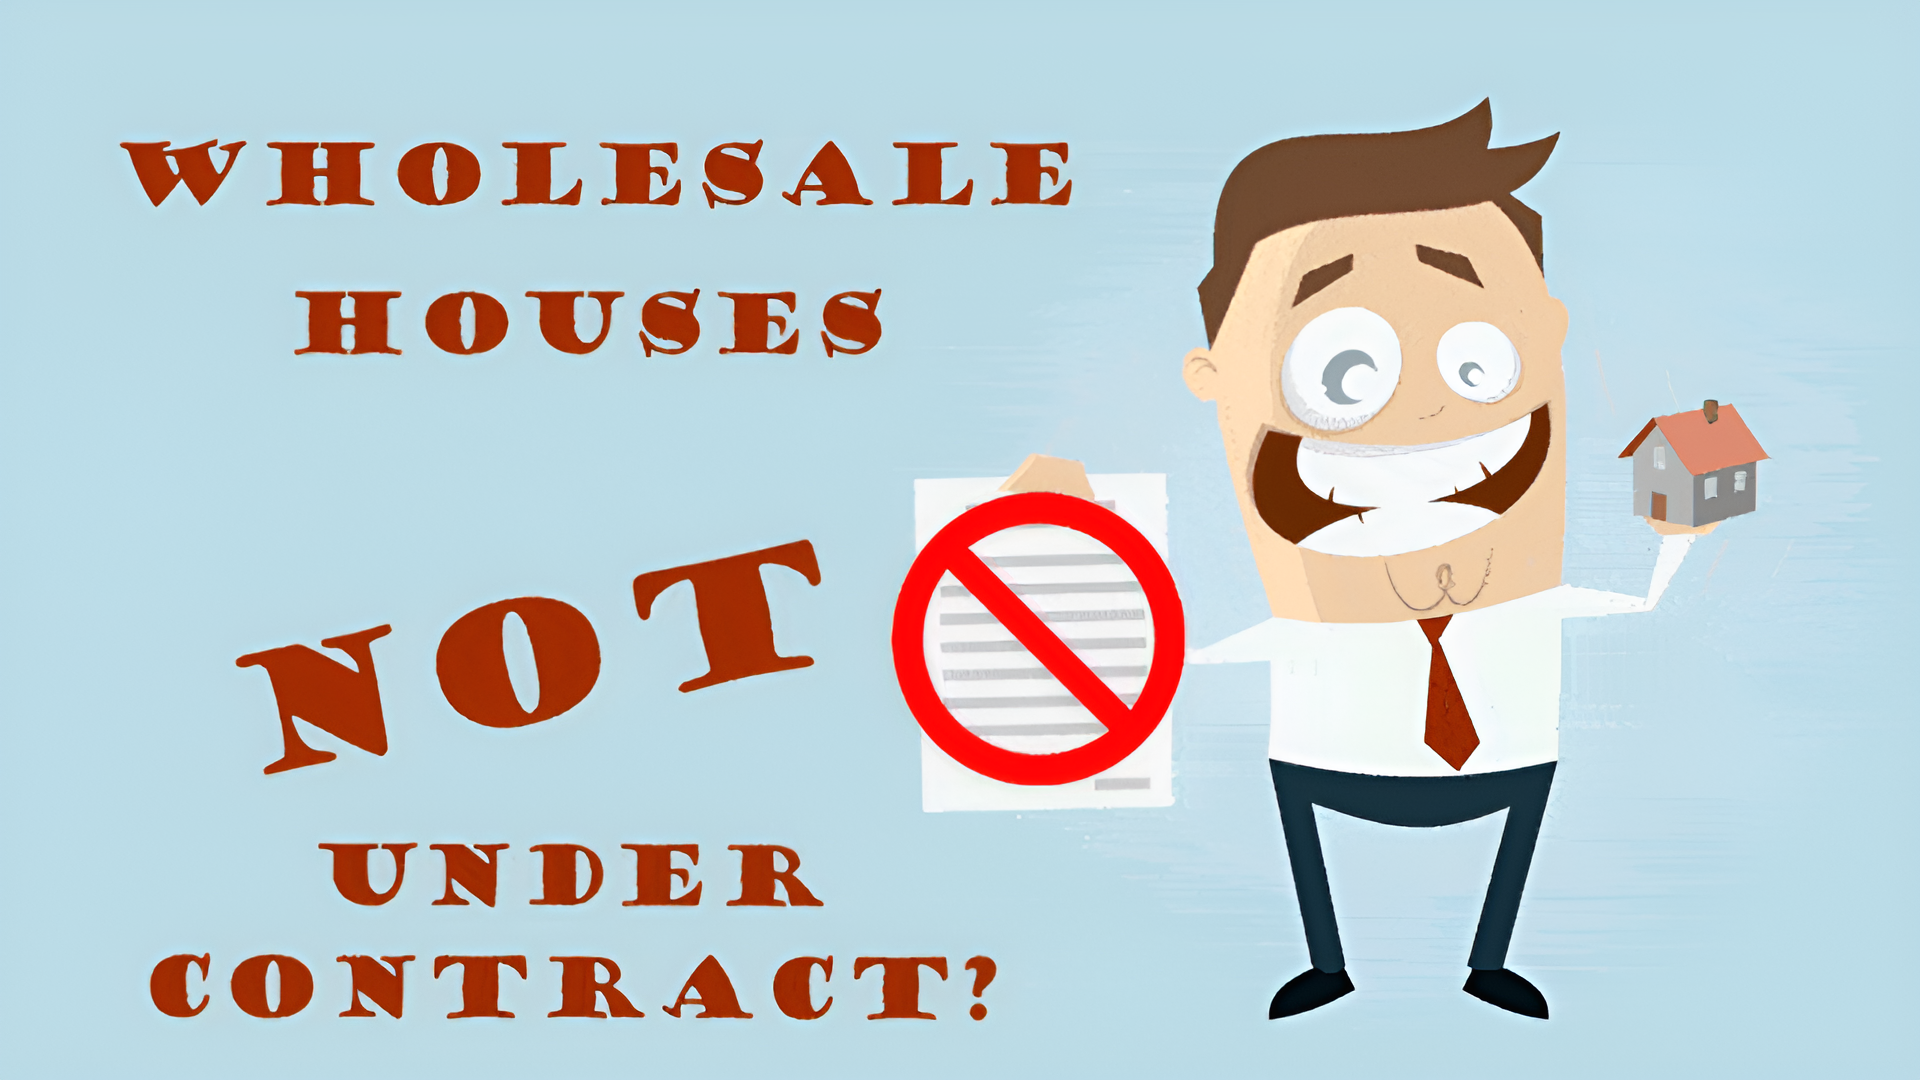 How I Wholesale Houses Not Under Contract